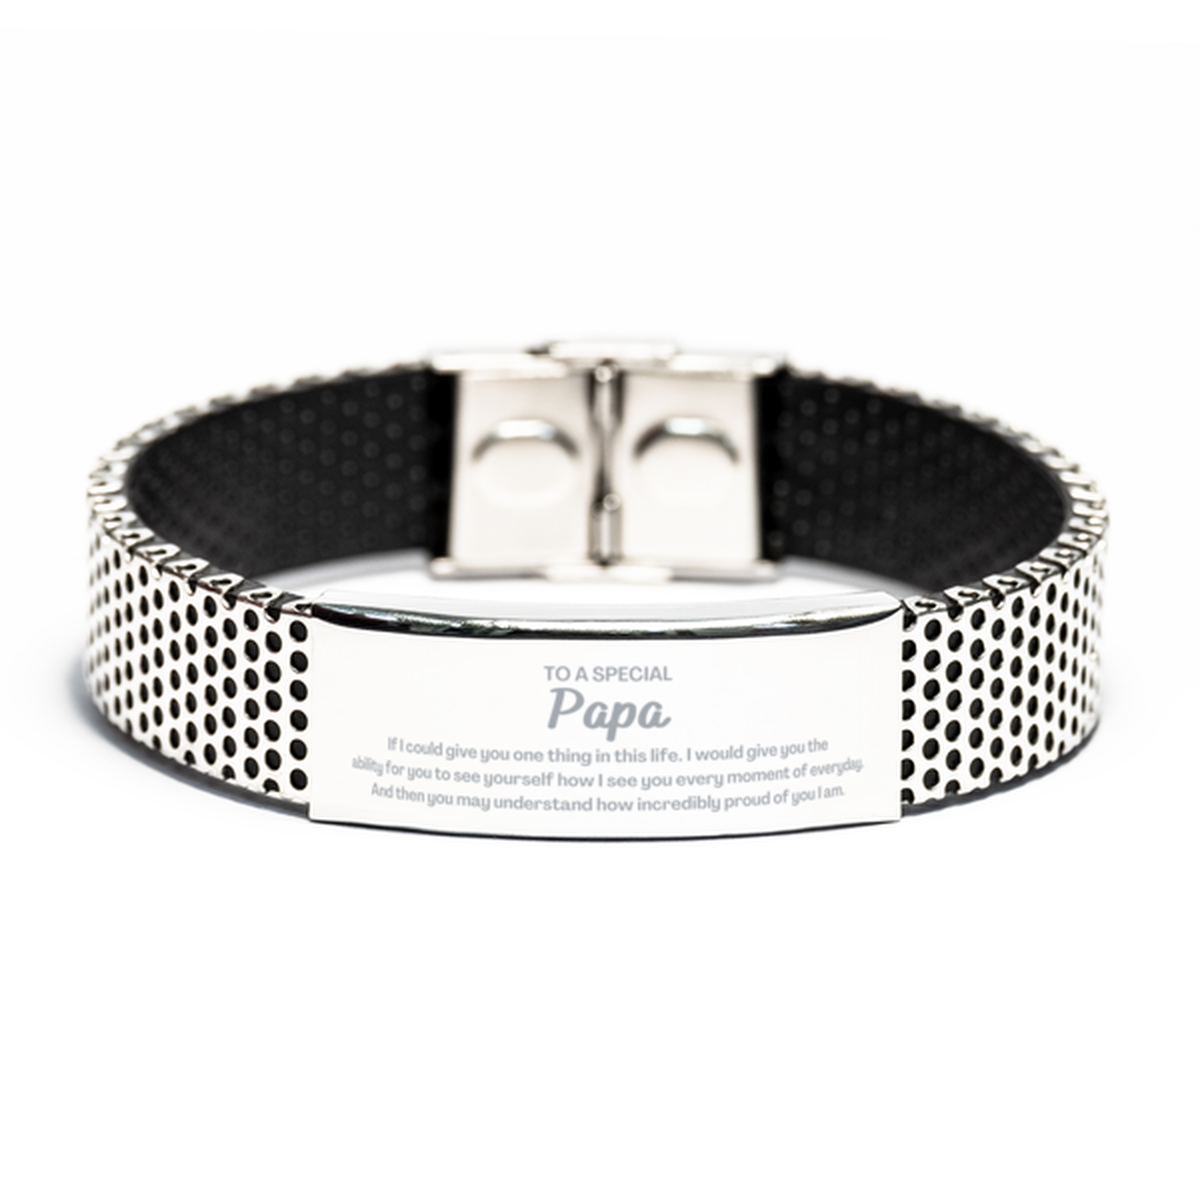 To My Papa Stainless Steel Bracelet, Gifts For Papa Engraved, Inspirational Gifts for Christmas Birthday, Epic Gifts for Papa To A Special Papa how incredibly proud of you I am